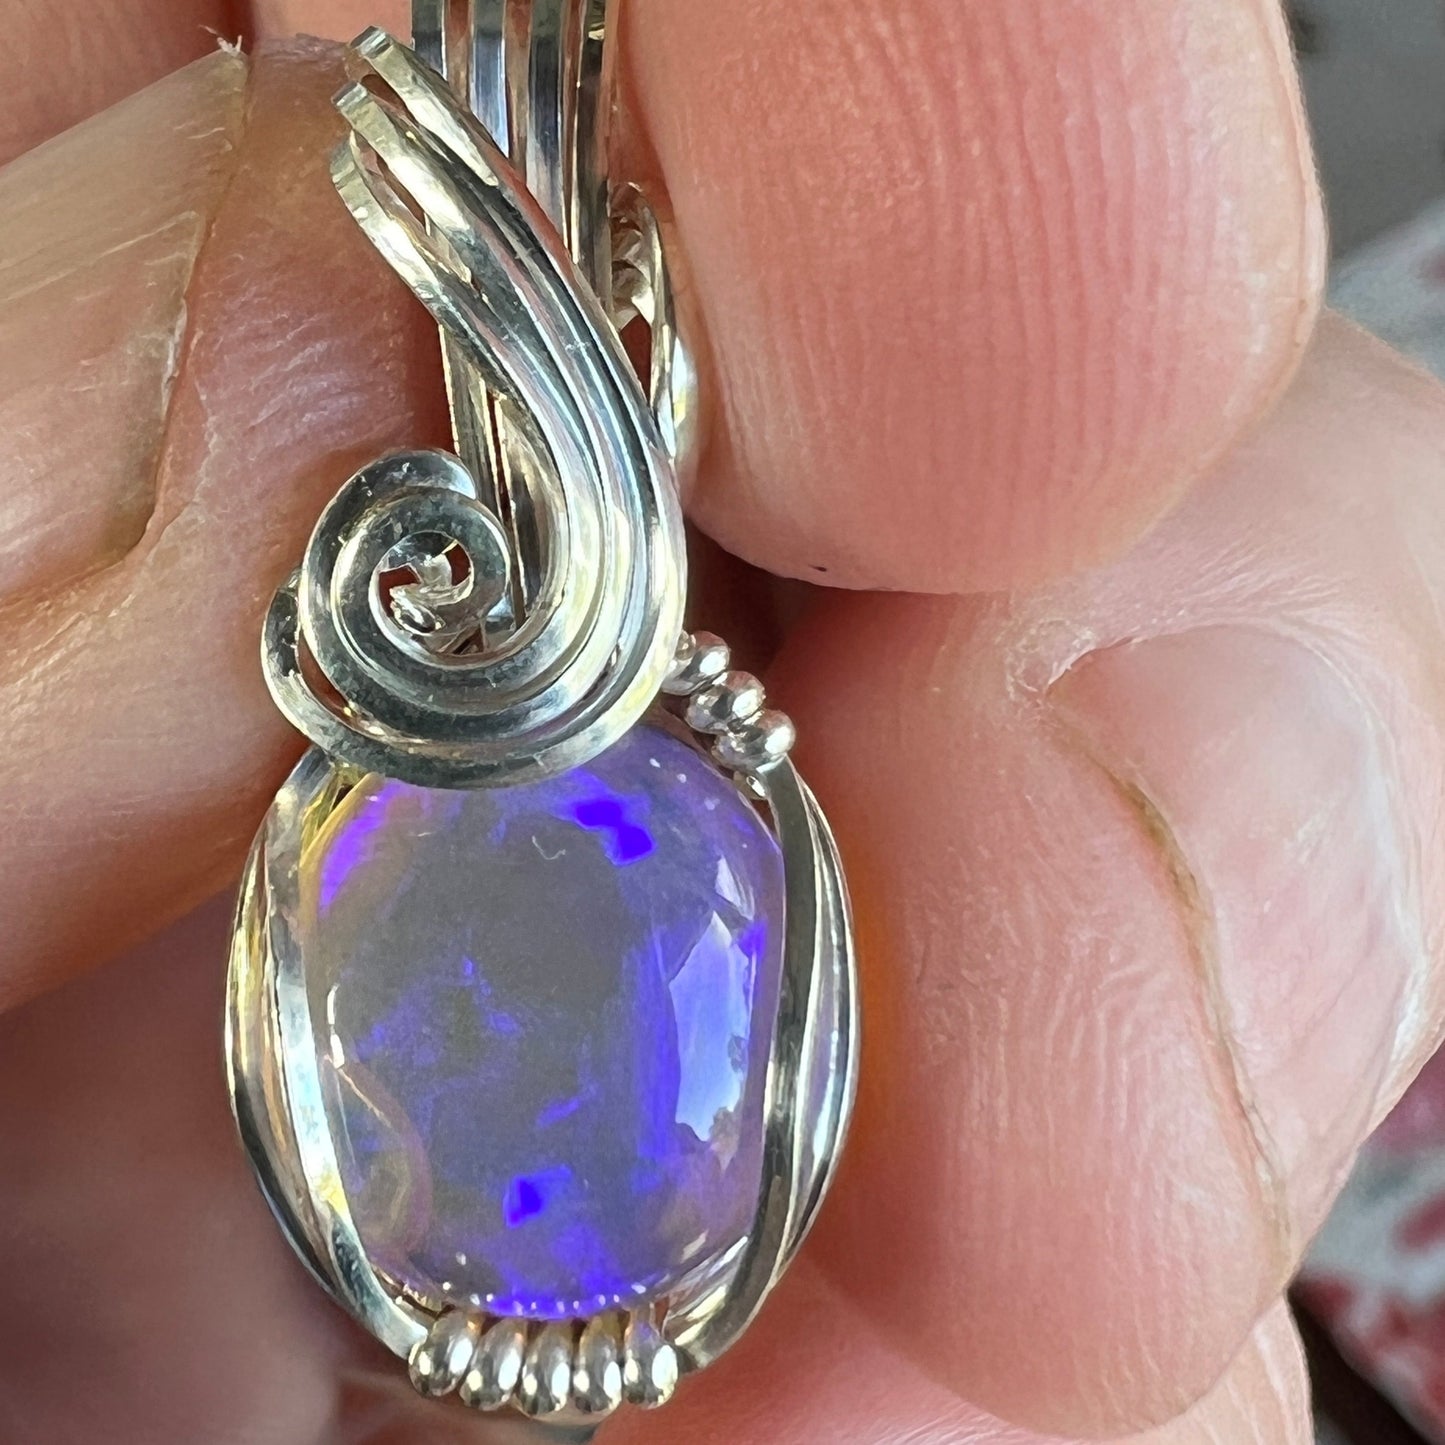 Beautifully cut Lightning Ridge Jelly Crystal opal. Cut and polished by Bill Johnson. Expertly set in a unique silver wire wrap. An awesome hand made gift.